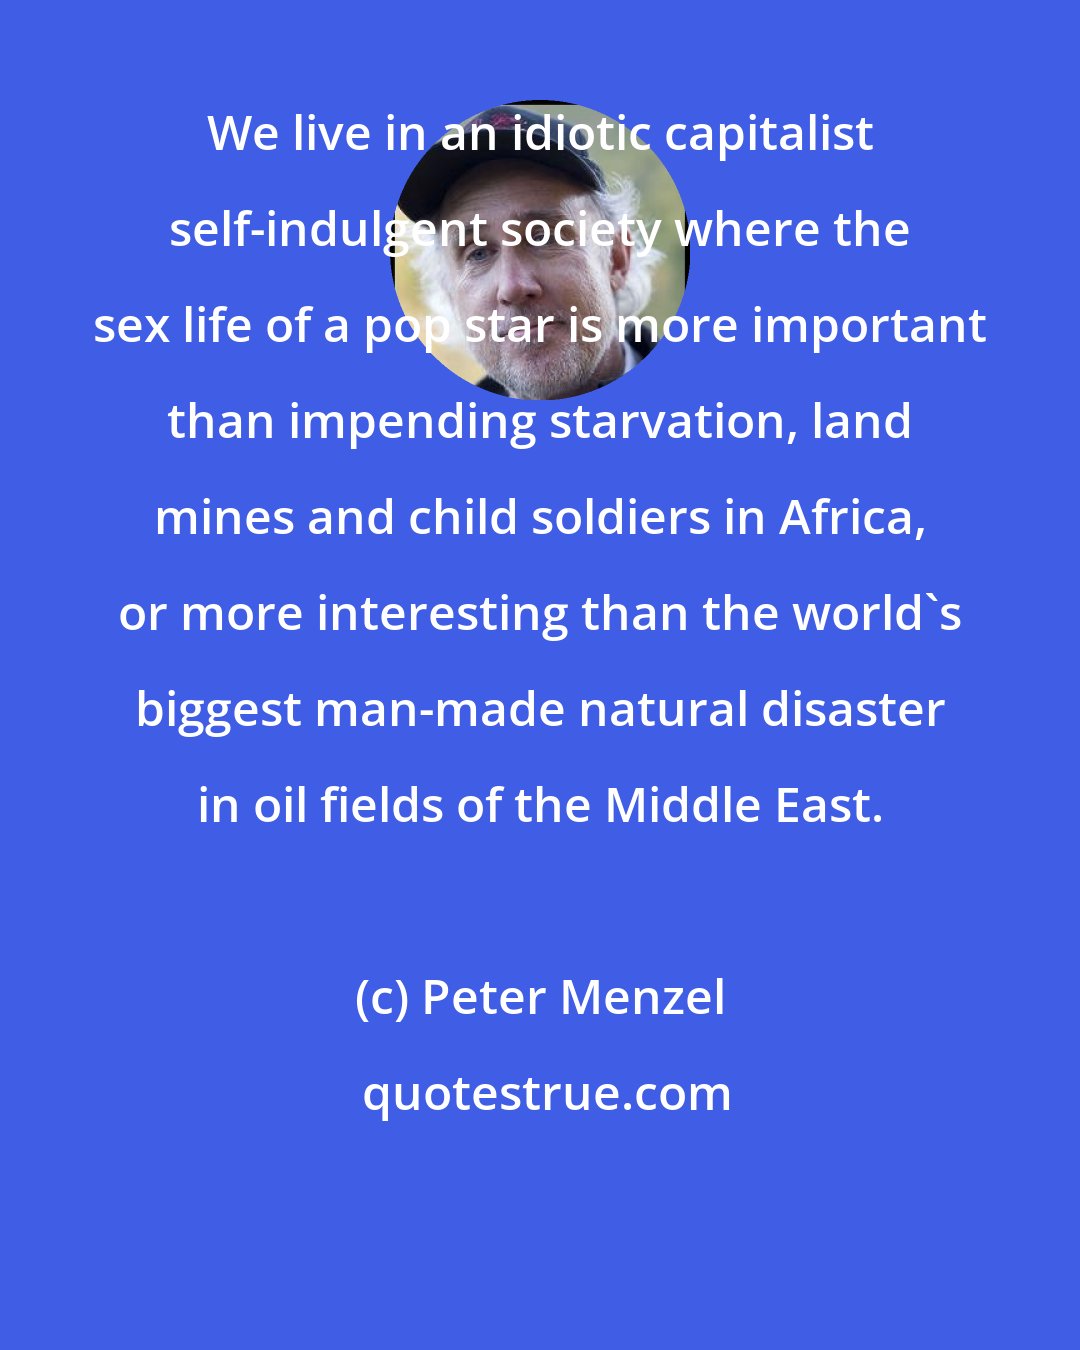 Peter Menzel: We live in an idiotic capitalist self-indulgent society where the sex life of a pop star is more important than impending starvation, land mines and child soldiers in Africa, or more interesting than the world's biggest man-made natural disaster in oil fields of the Middle East.